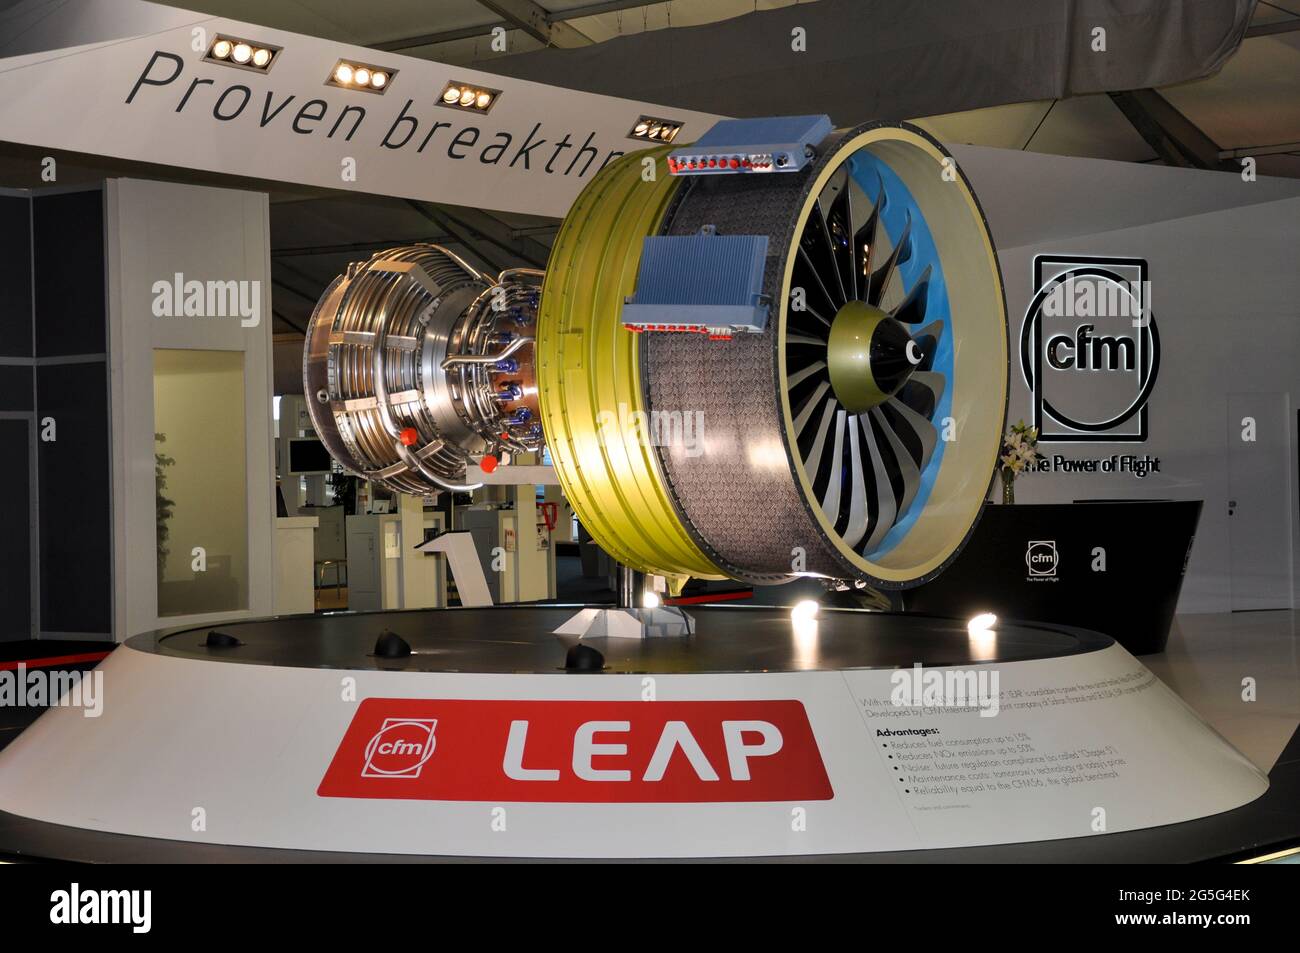 CFM International LEAP high-bypass turbofan engine display stand at the Farnborough International Airshow trade fair 2012, UK. Used by Boeing 737 MAX Stock Photo